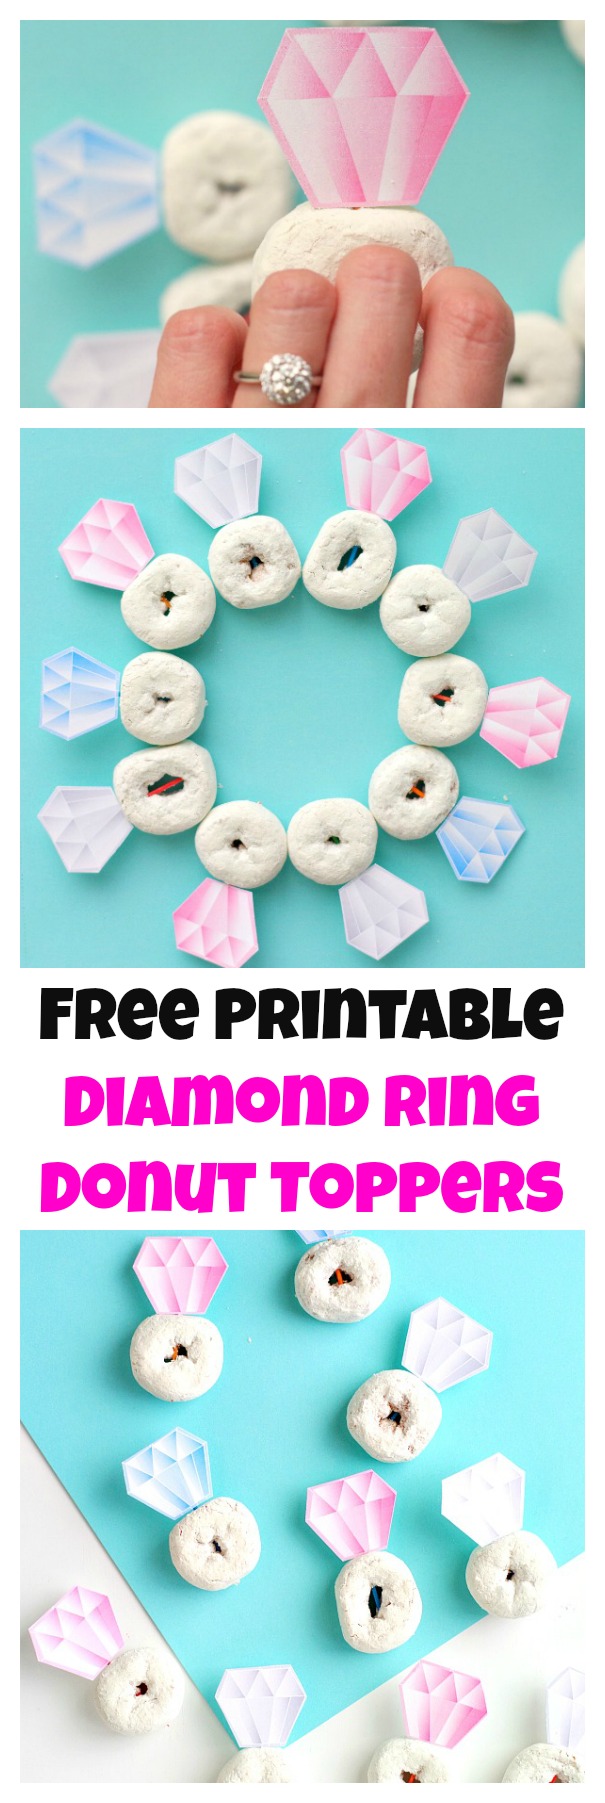 Free Printable Diamond Ring Donut Toppers